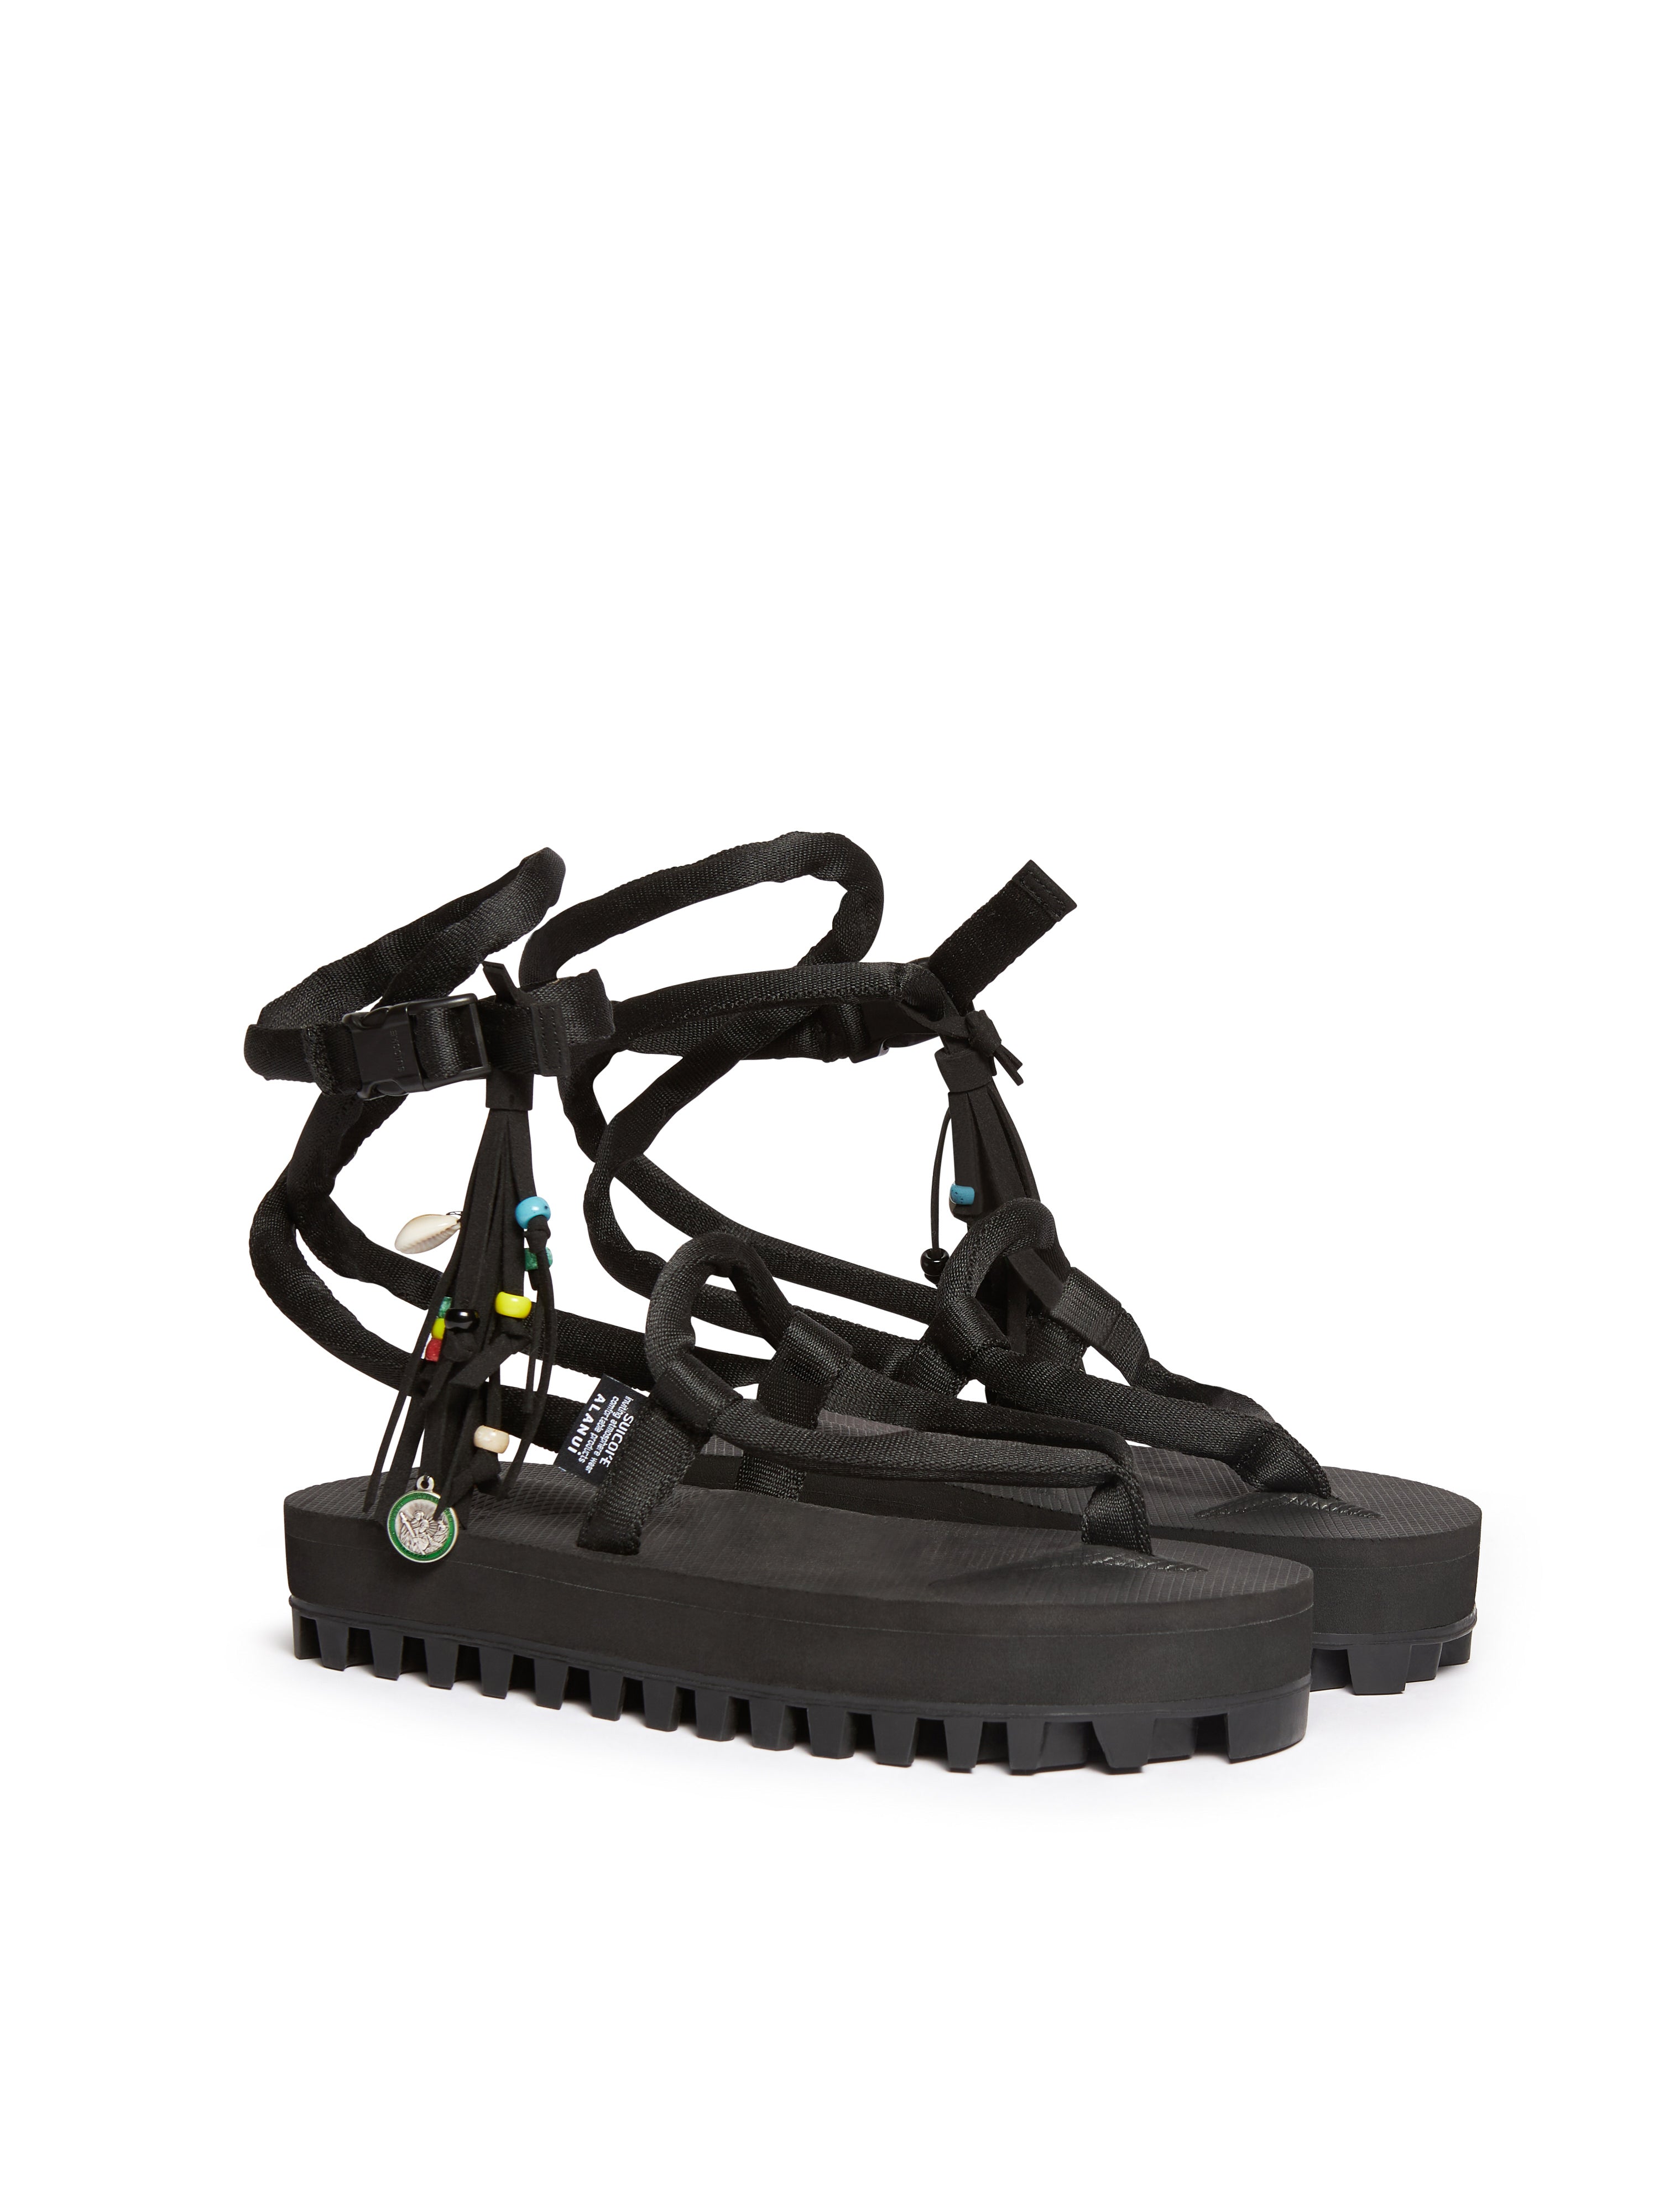 SUICOKE Alanui Edition GUT-HI-ab sandals with Cushioned Nylon Straps w/ Suede Fringe Accents , black midsole and sole. From Spring/Summer 2022 collection on SUICOKE Official US & Canada Webstore.